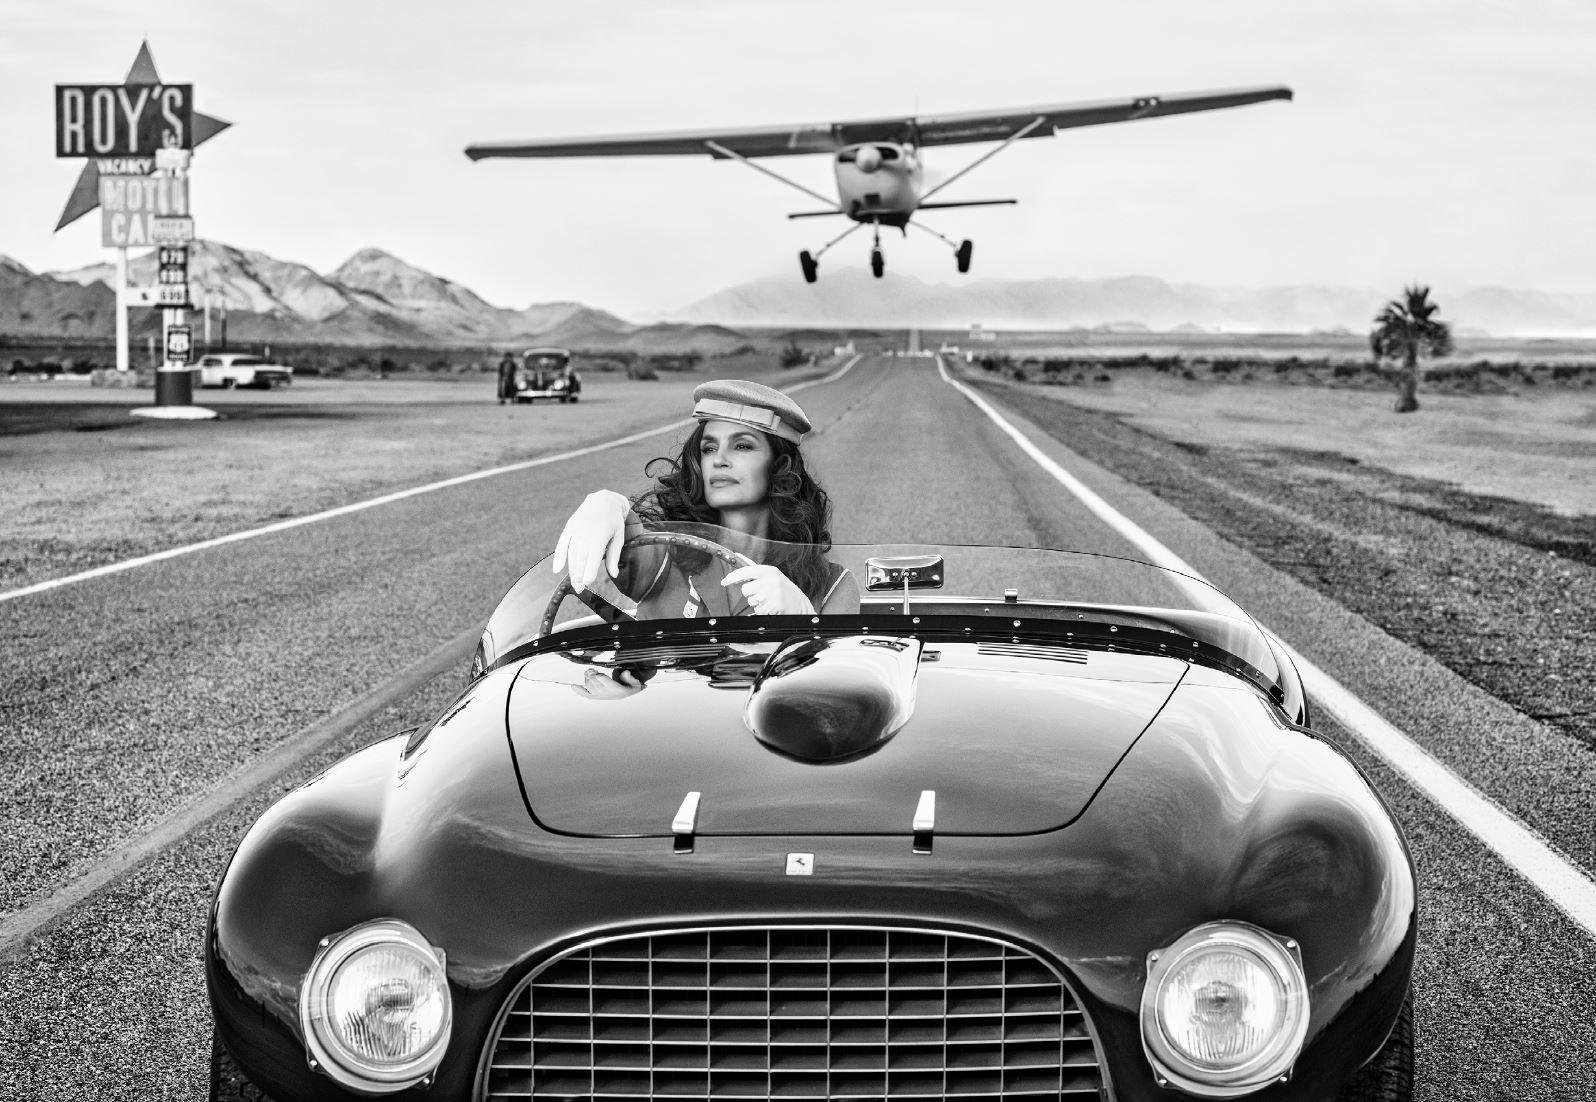 South by Southwest - Supermodel Cindy Crawford in vintage Ferrari on route 66